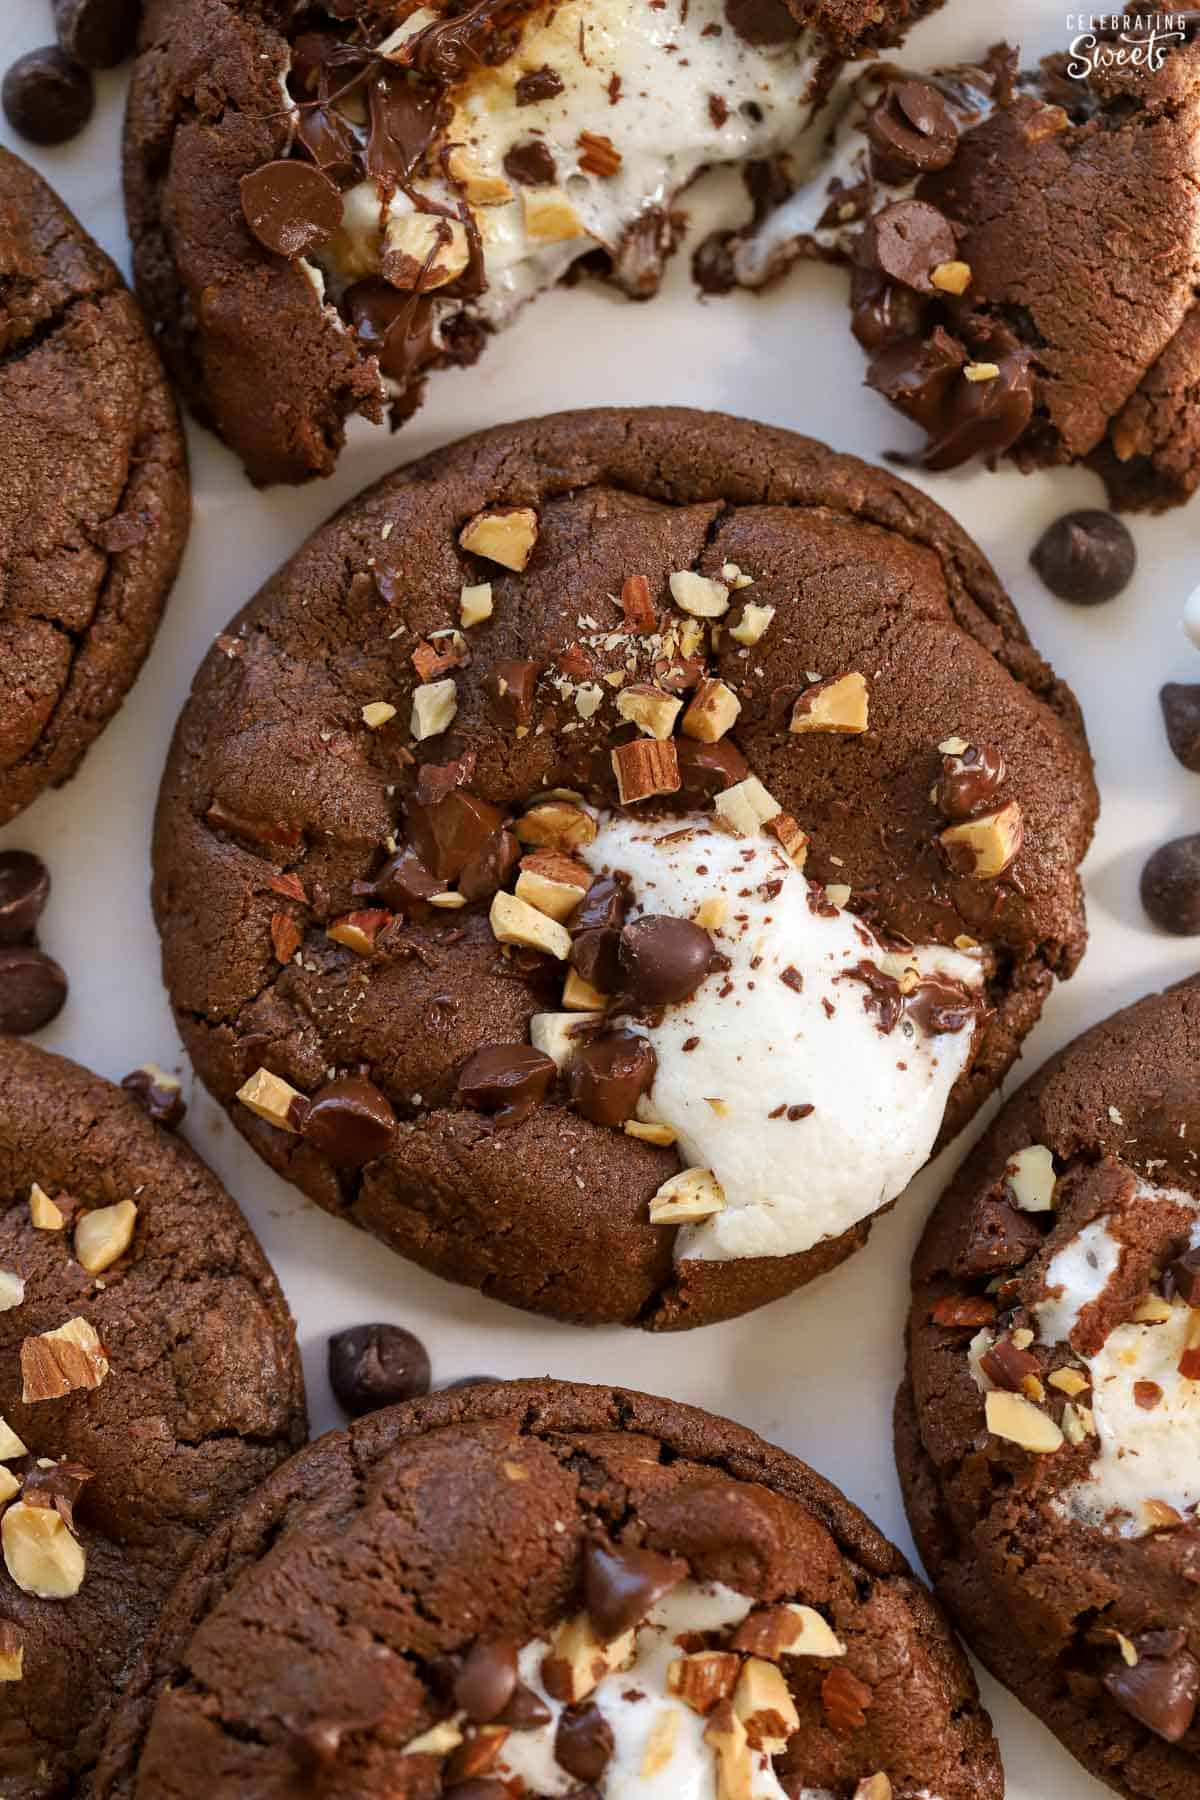 Chocolate cookie topped with marshmallows and nuts.